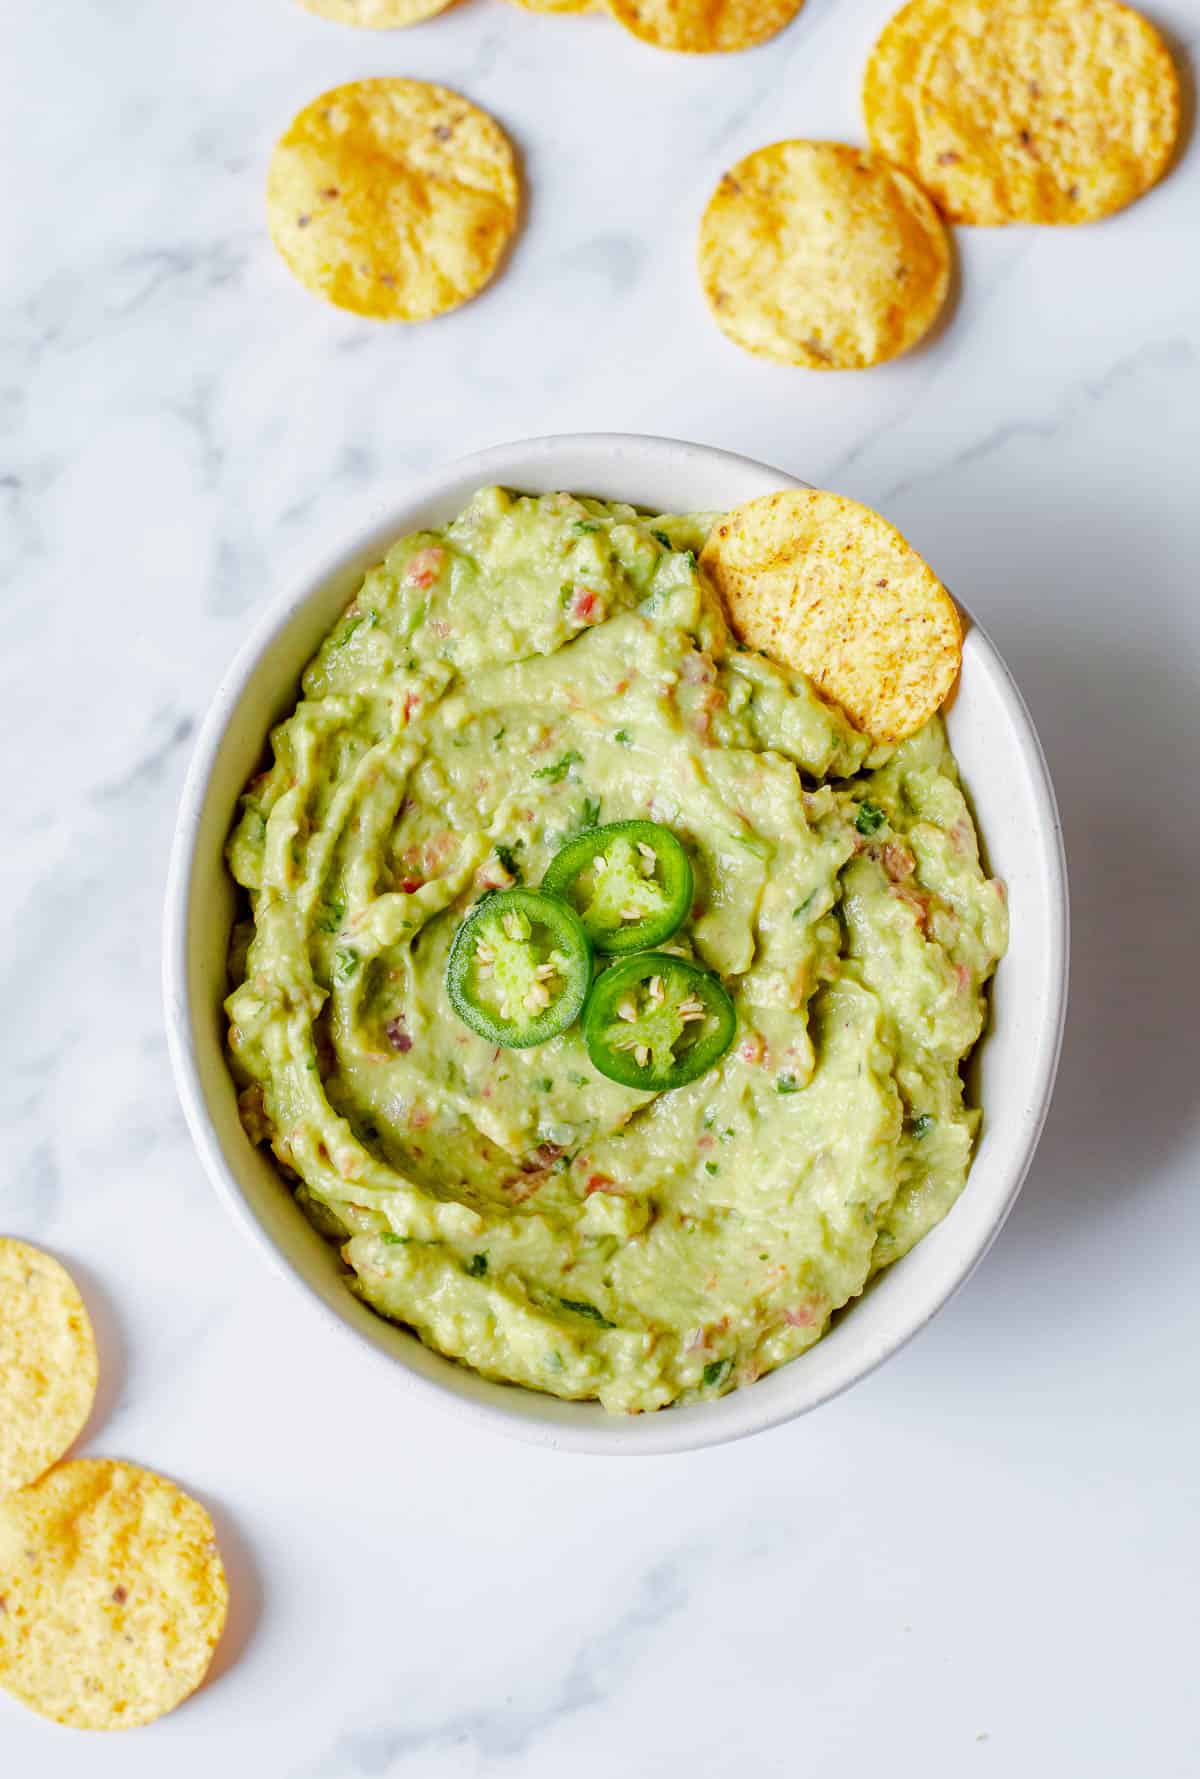 Guacamole in a white bowl with tortilla chips.